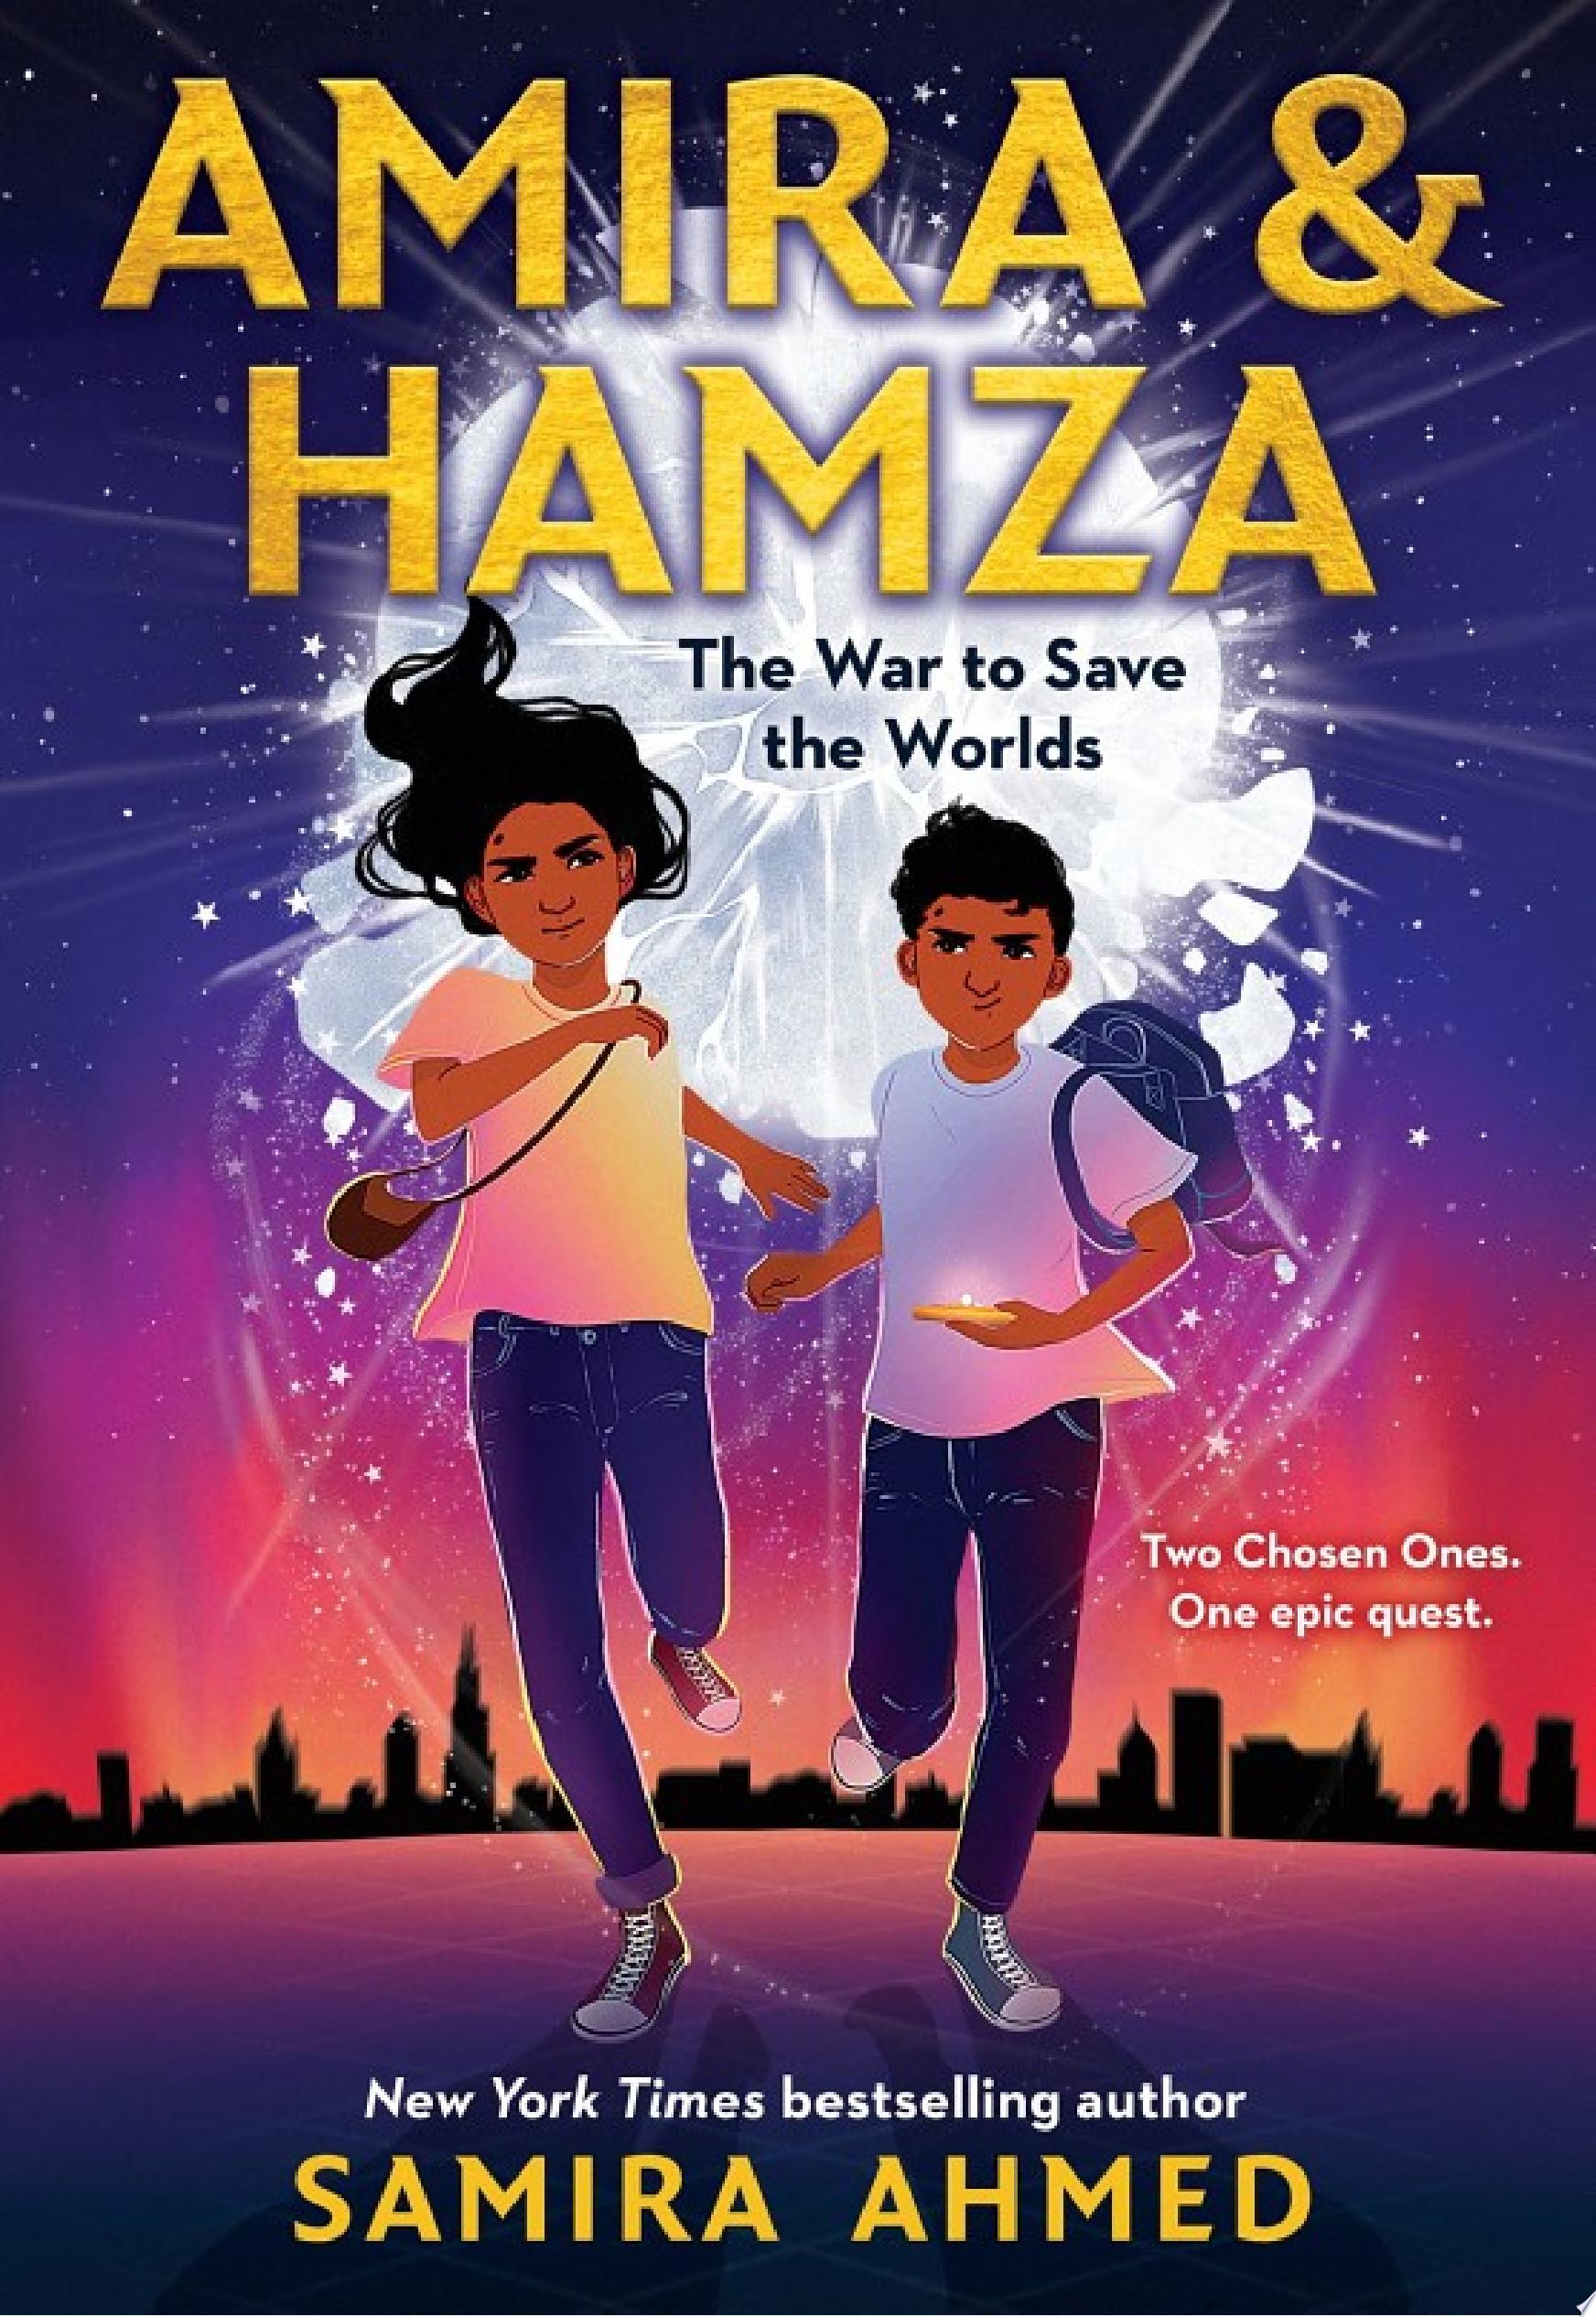 Image for "Amira & Hamza: The War to Save the Worlds"